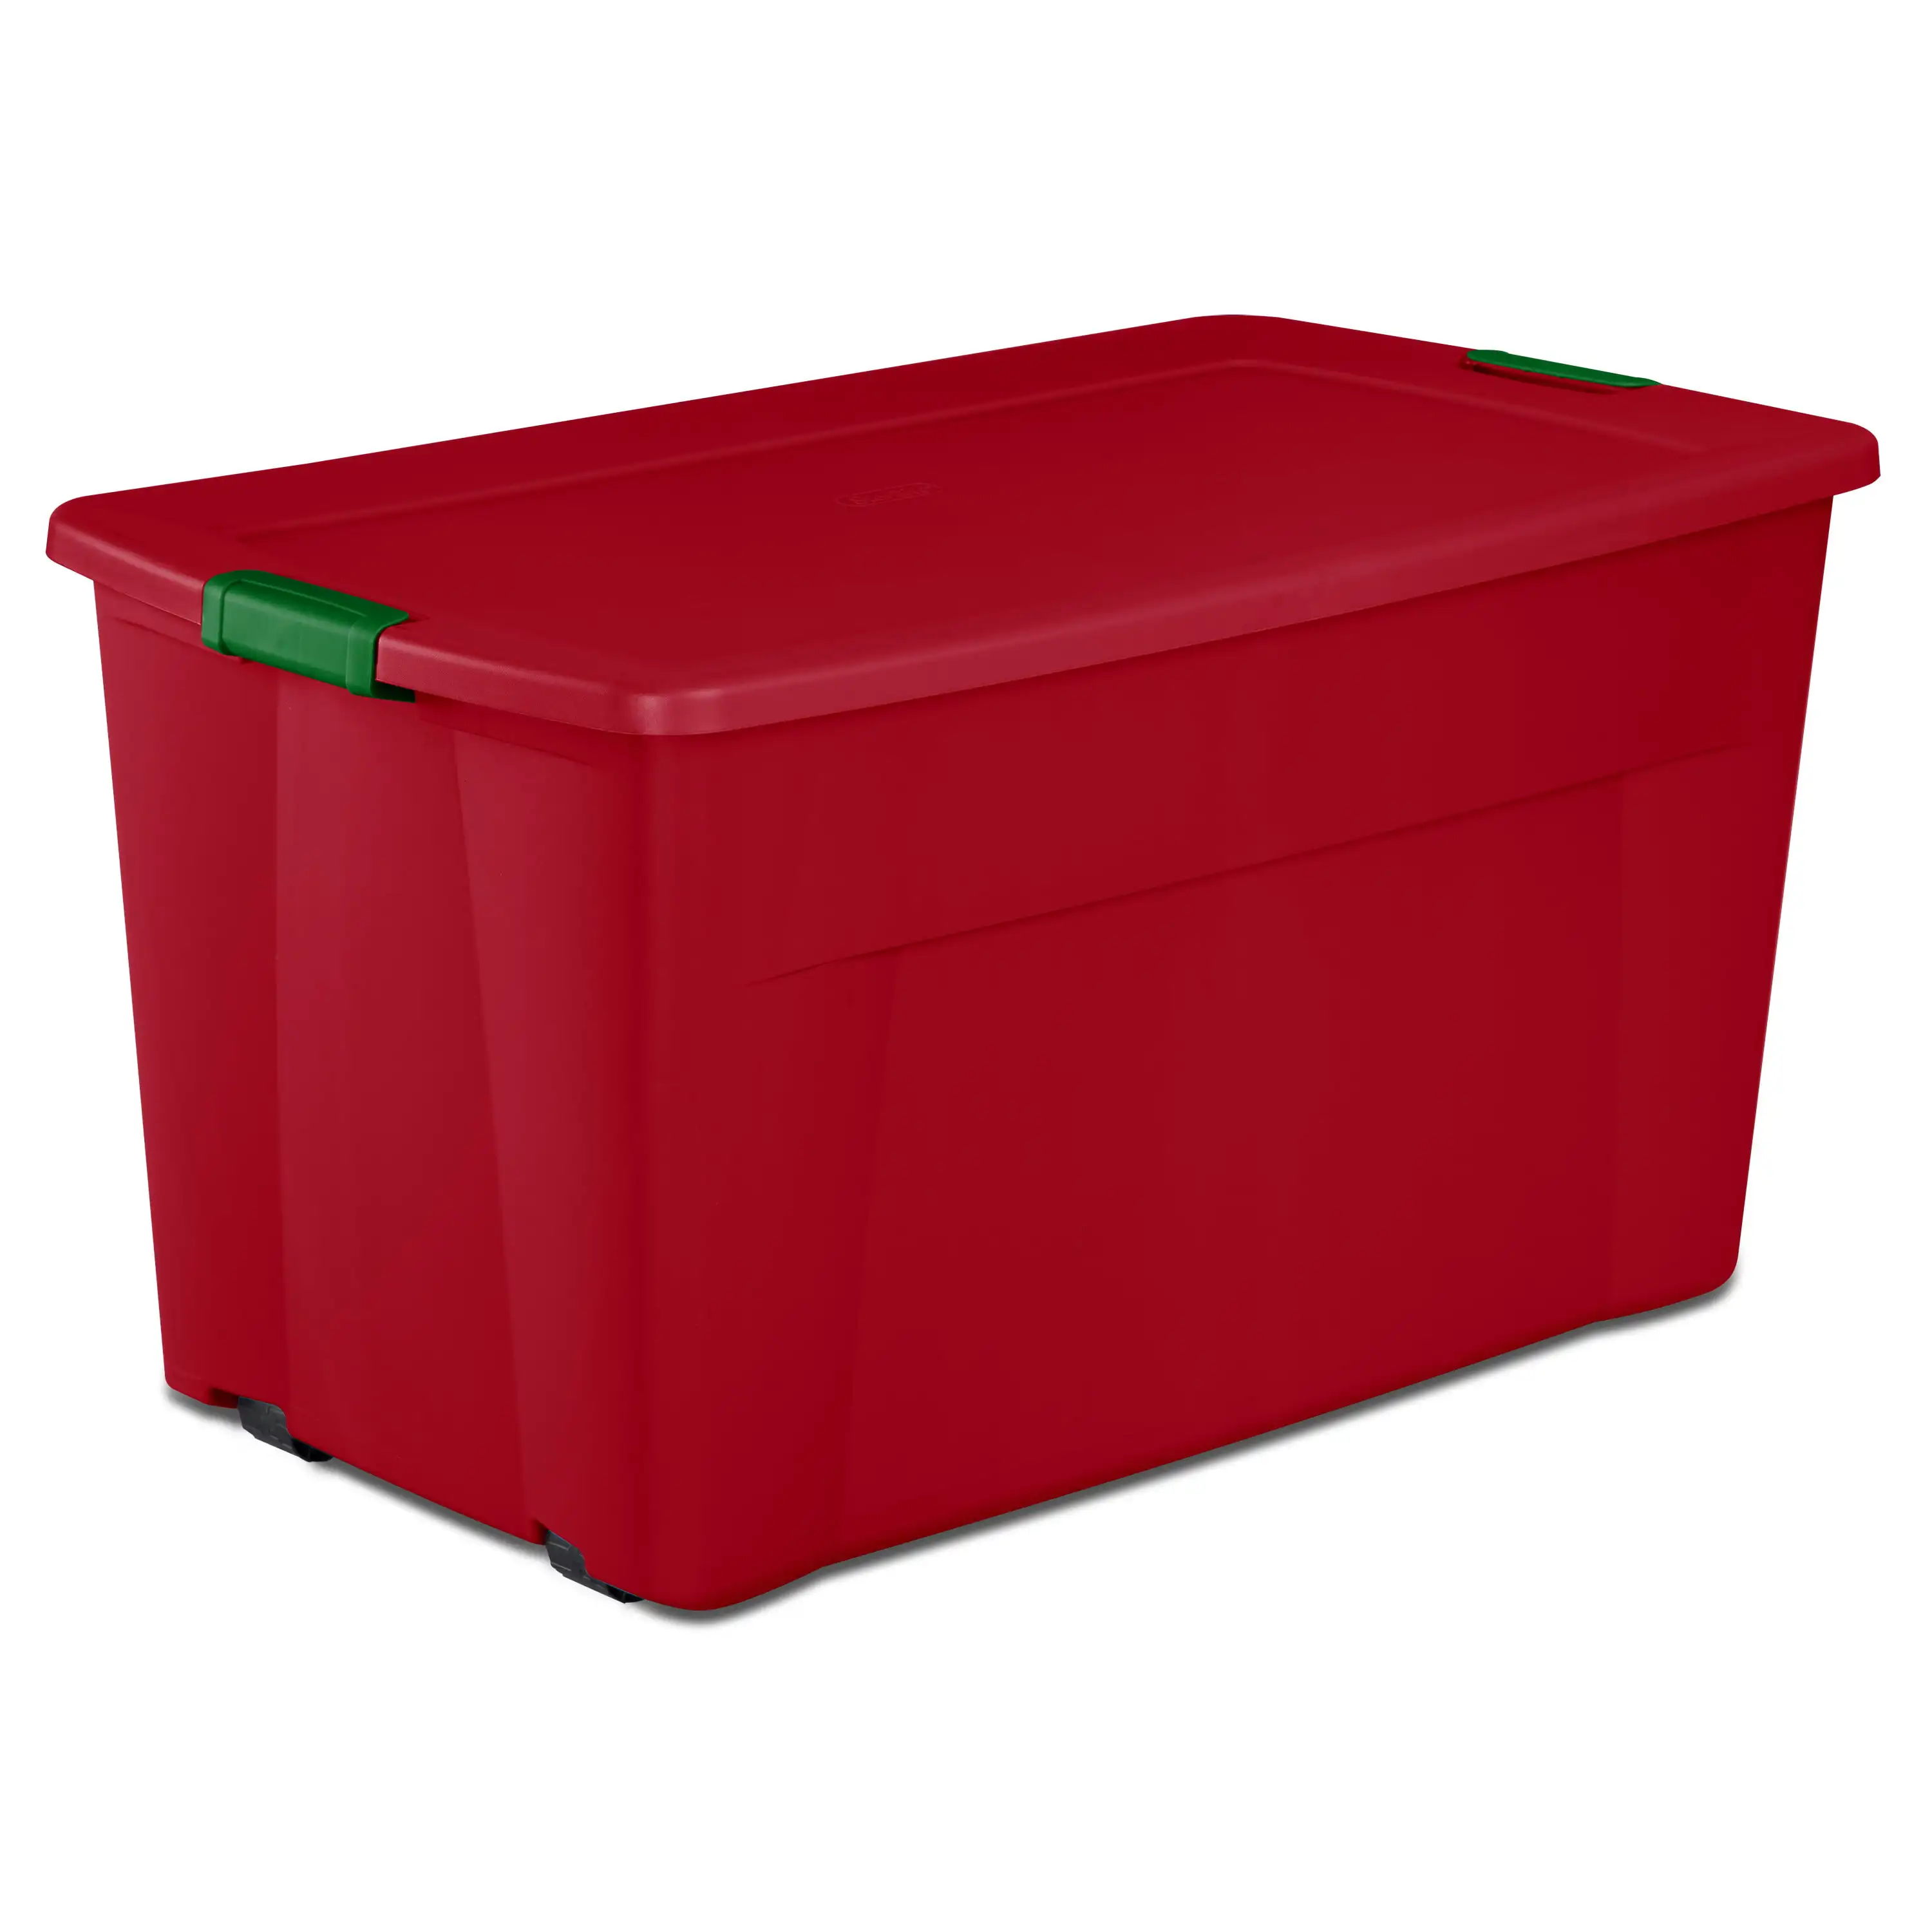 https://ae01.alicdn.com/kf/S924970f2a4e1481fbb716389fc535a77I/Set-of-4-Red-Christmas-Sterilite-45-Gallon-Wheeled-Latch-Tote-Boxes-Festive-Storage-with-Wheels.jpg